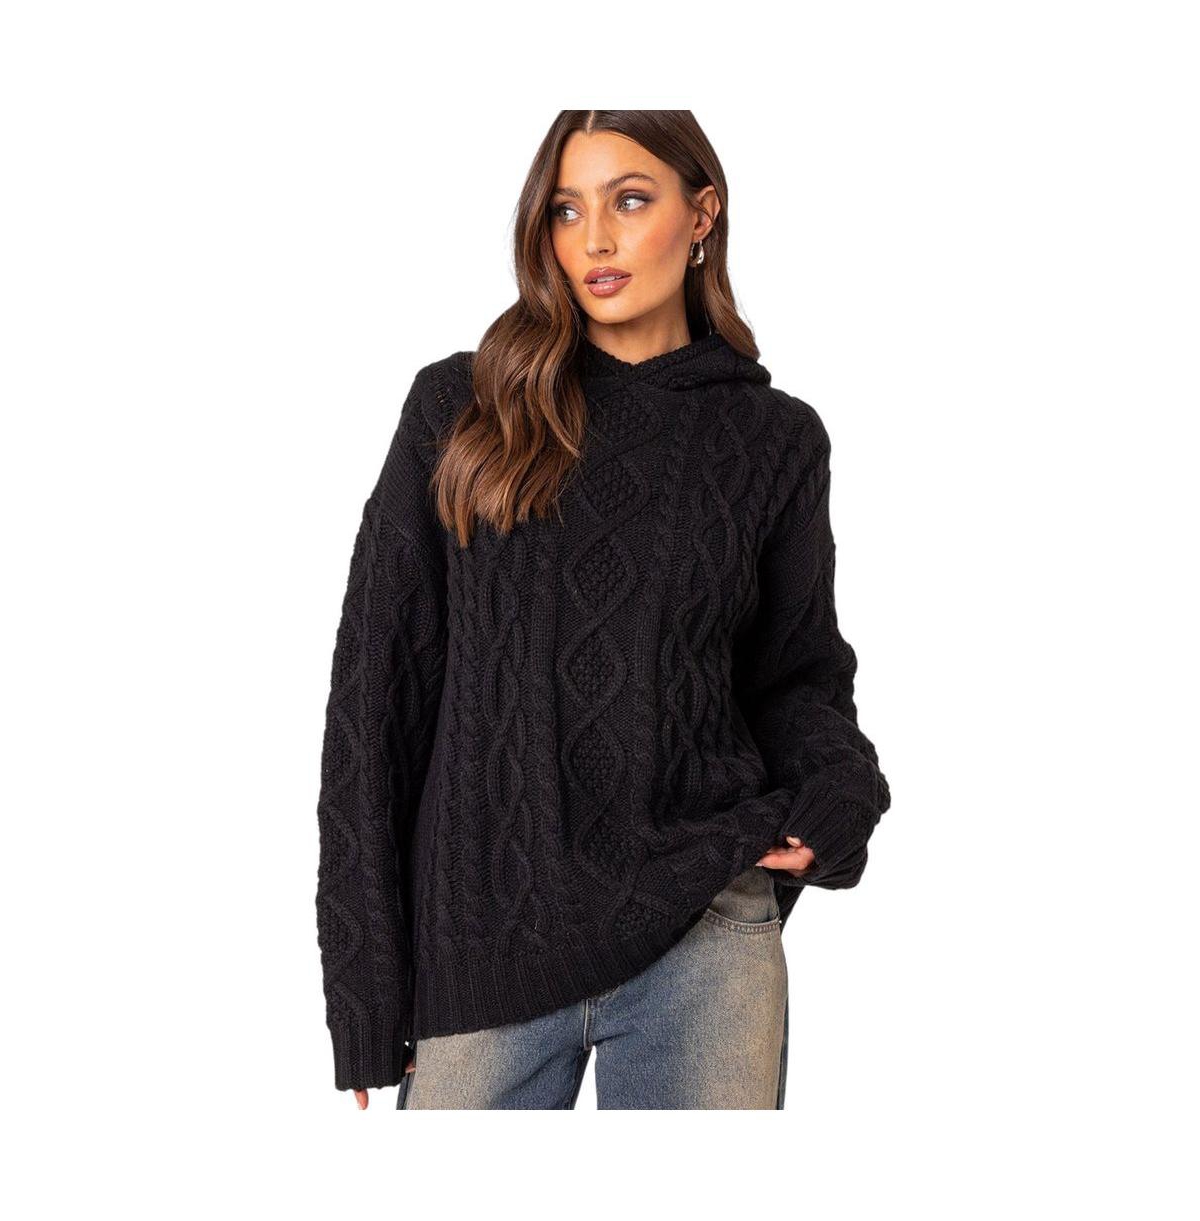 EDIKTED WOMEN'S OVERSIZED CABLE KNIT SWEATER HOODIE